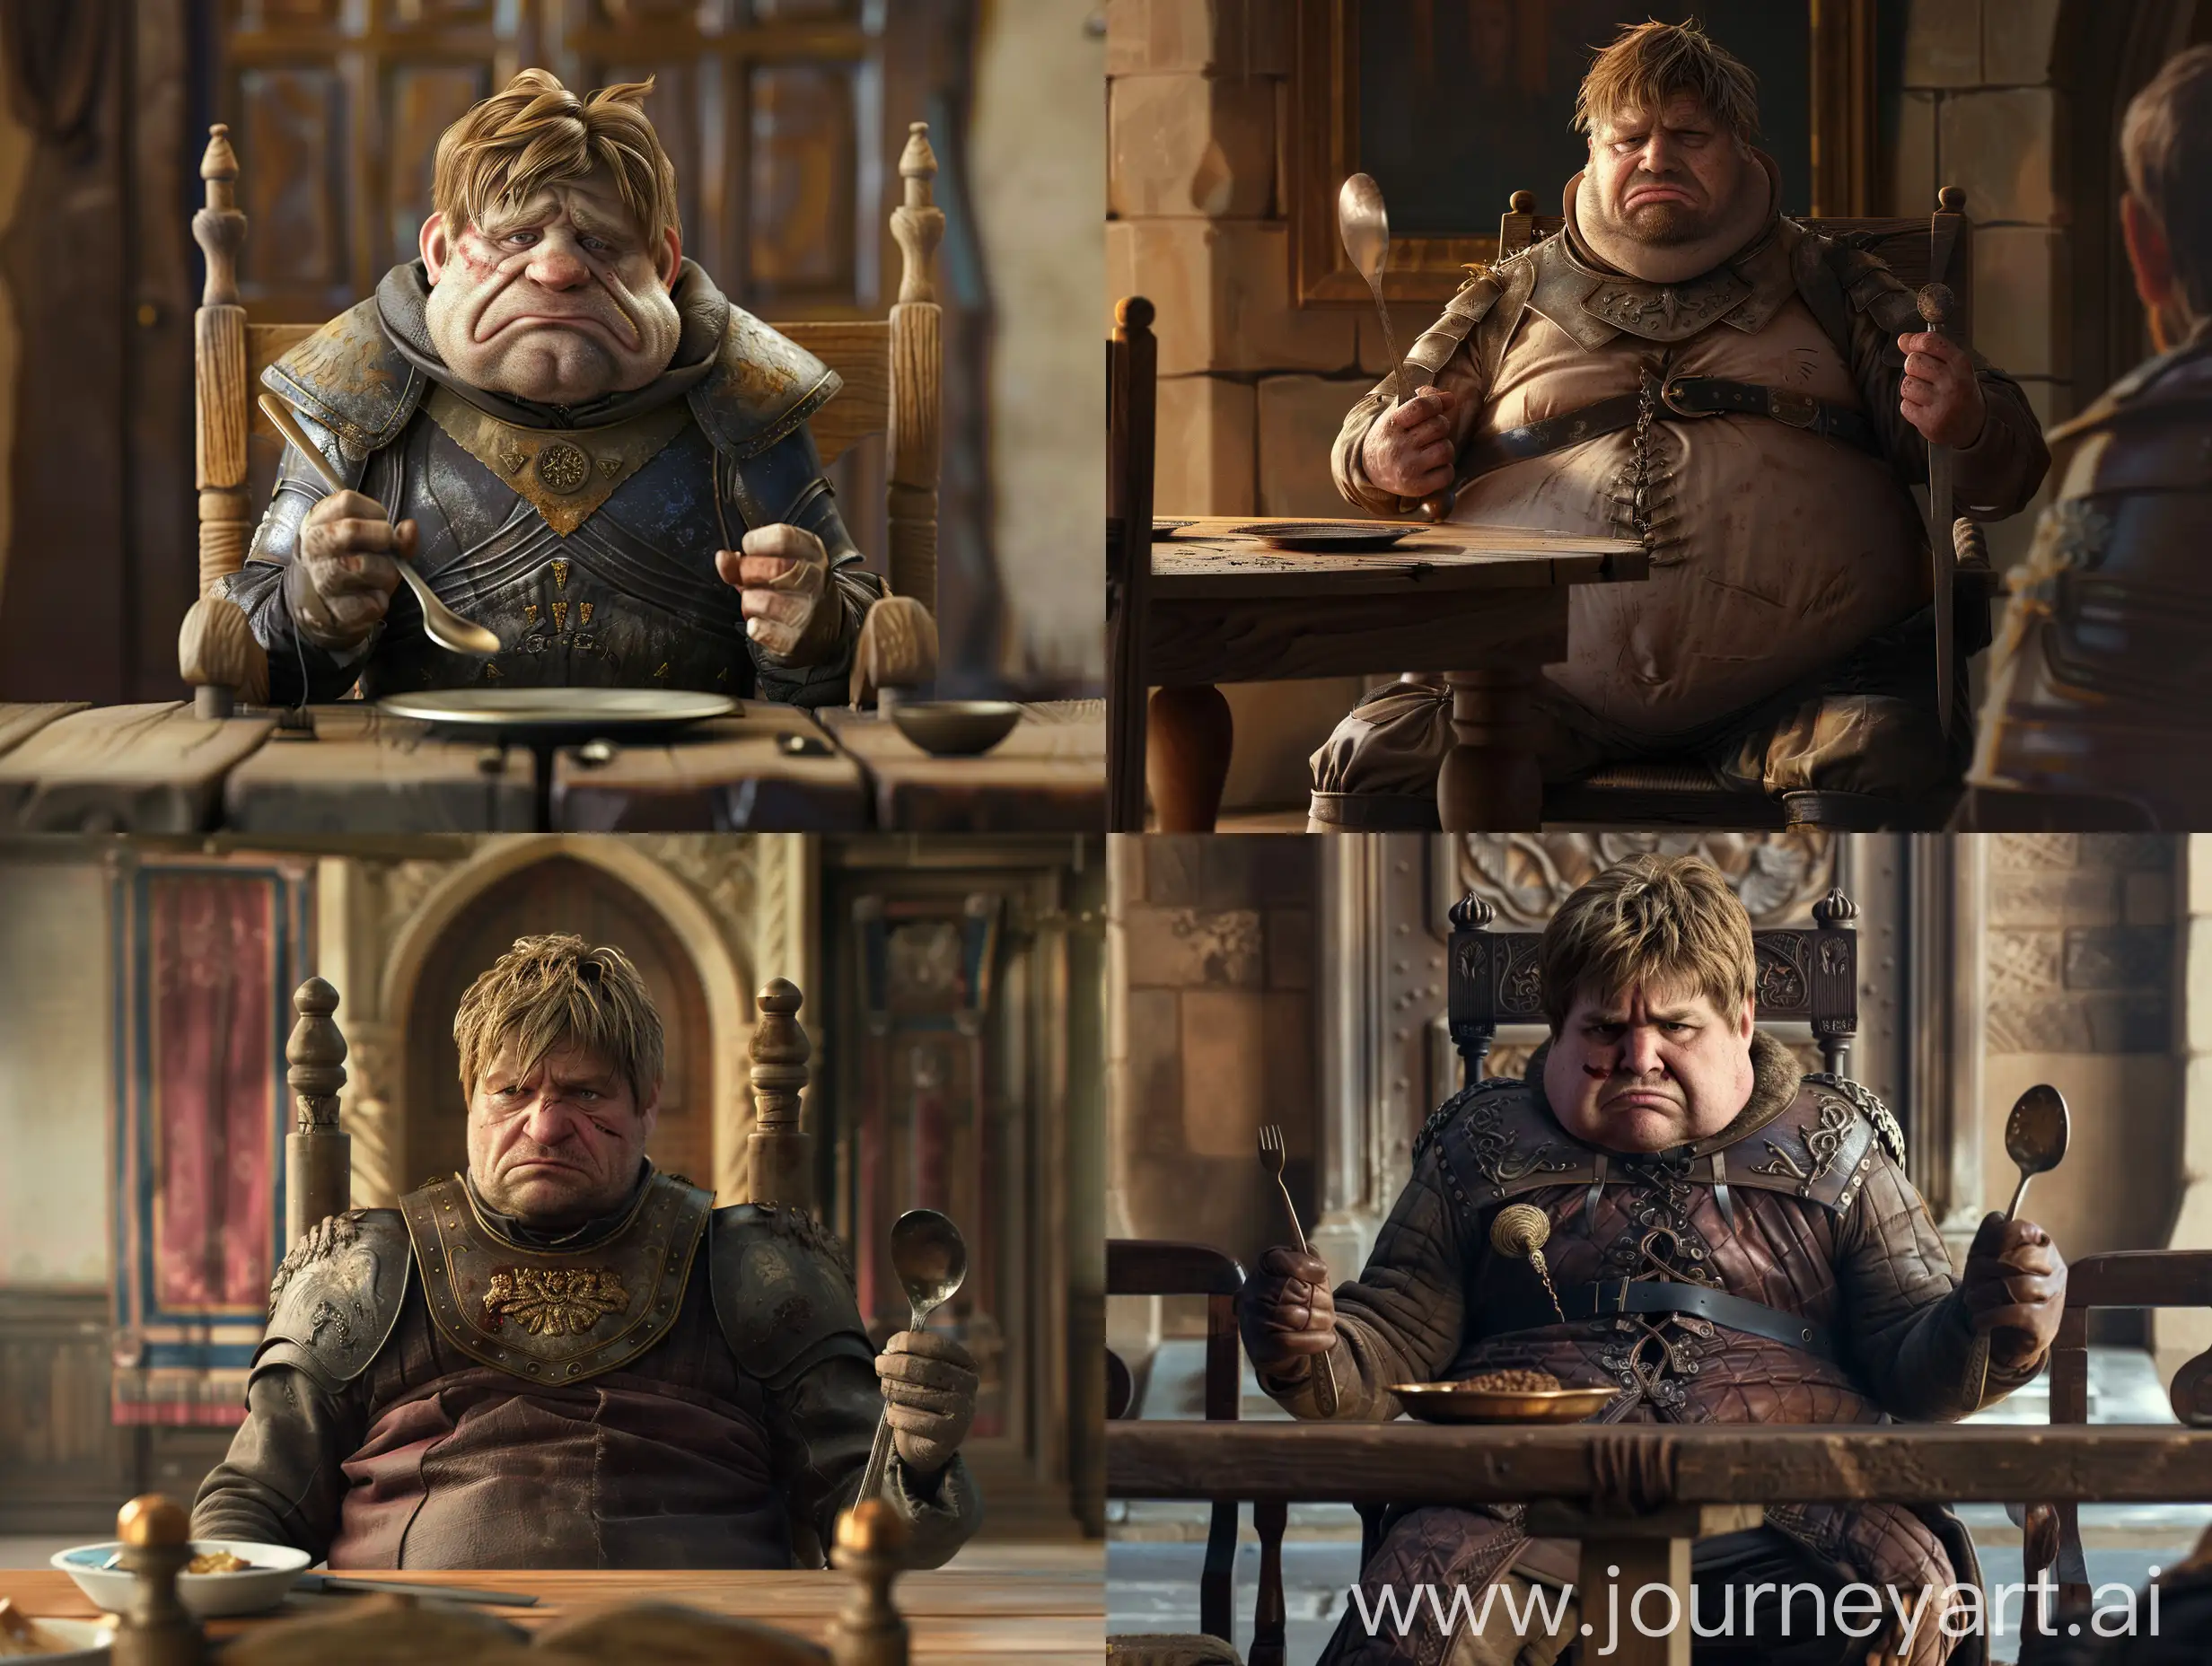 Jaime Lannister in the Game of Thrones series, Jaime Lannister is fat and has a fat face and body, Jaime Lannister sits at the dining table of Winterfell with the same body and fat face, Jaime Lannister sits on a wooden chair with the same body and fat face, Jaime Lannister is sad and hungry. Jaime holds a spoon in his right hand, Jaime Lannister holds a fork in his left, Jaime Lannister's expression is one of pure despair, the background is the dining room of Winterfell Palace, the lighting is classic, q2